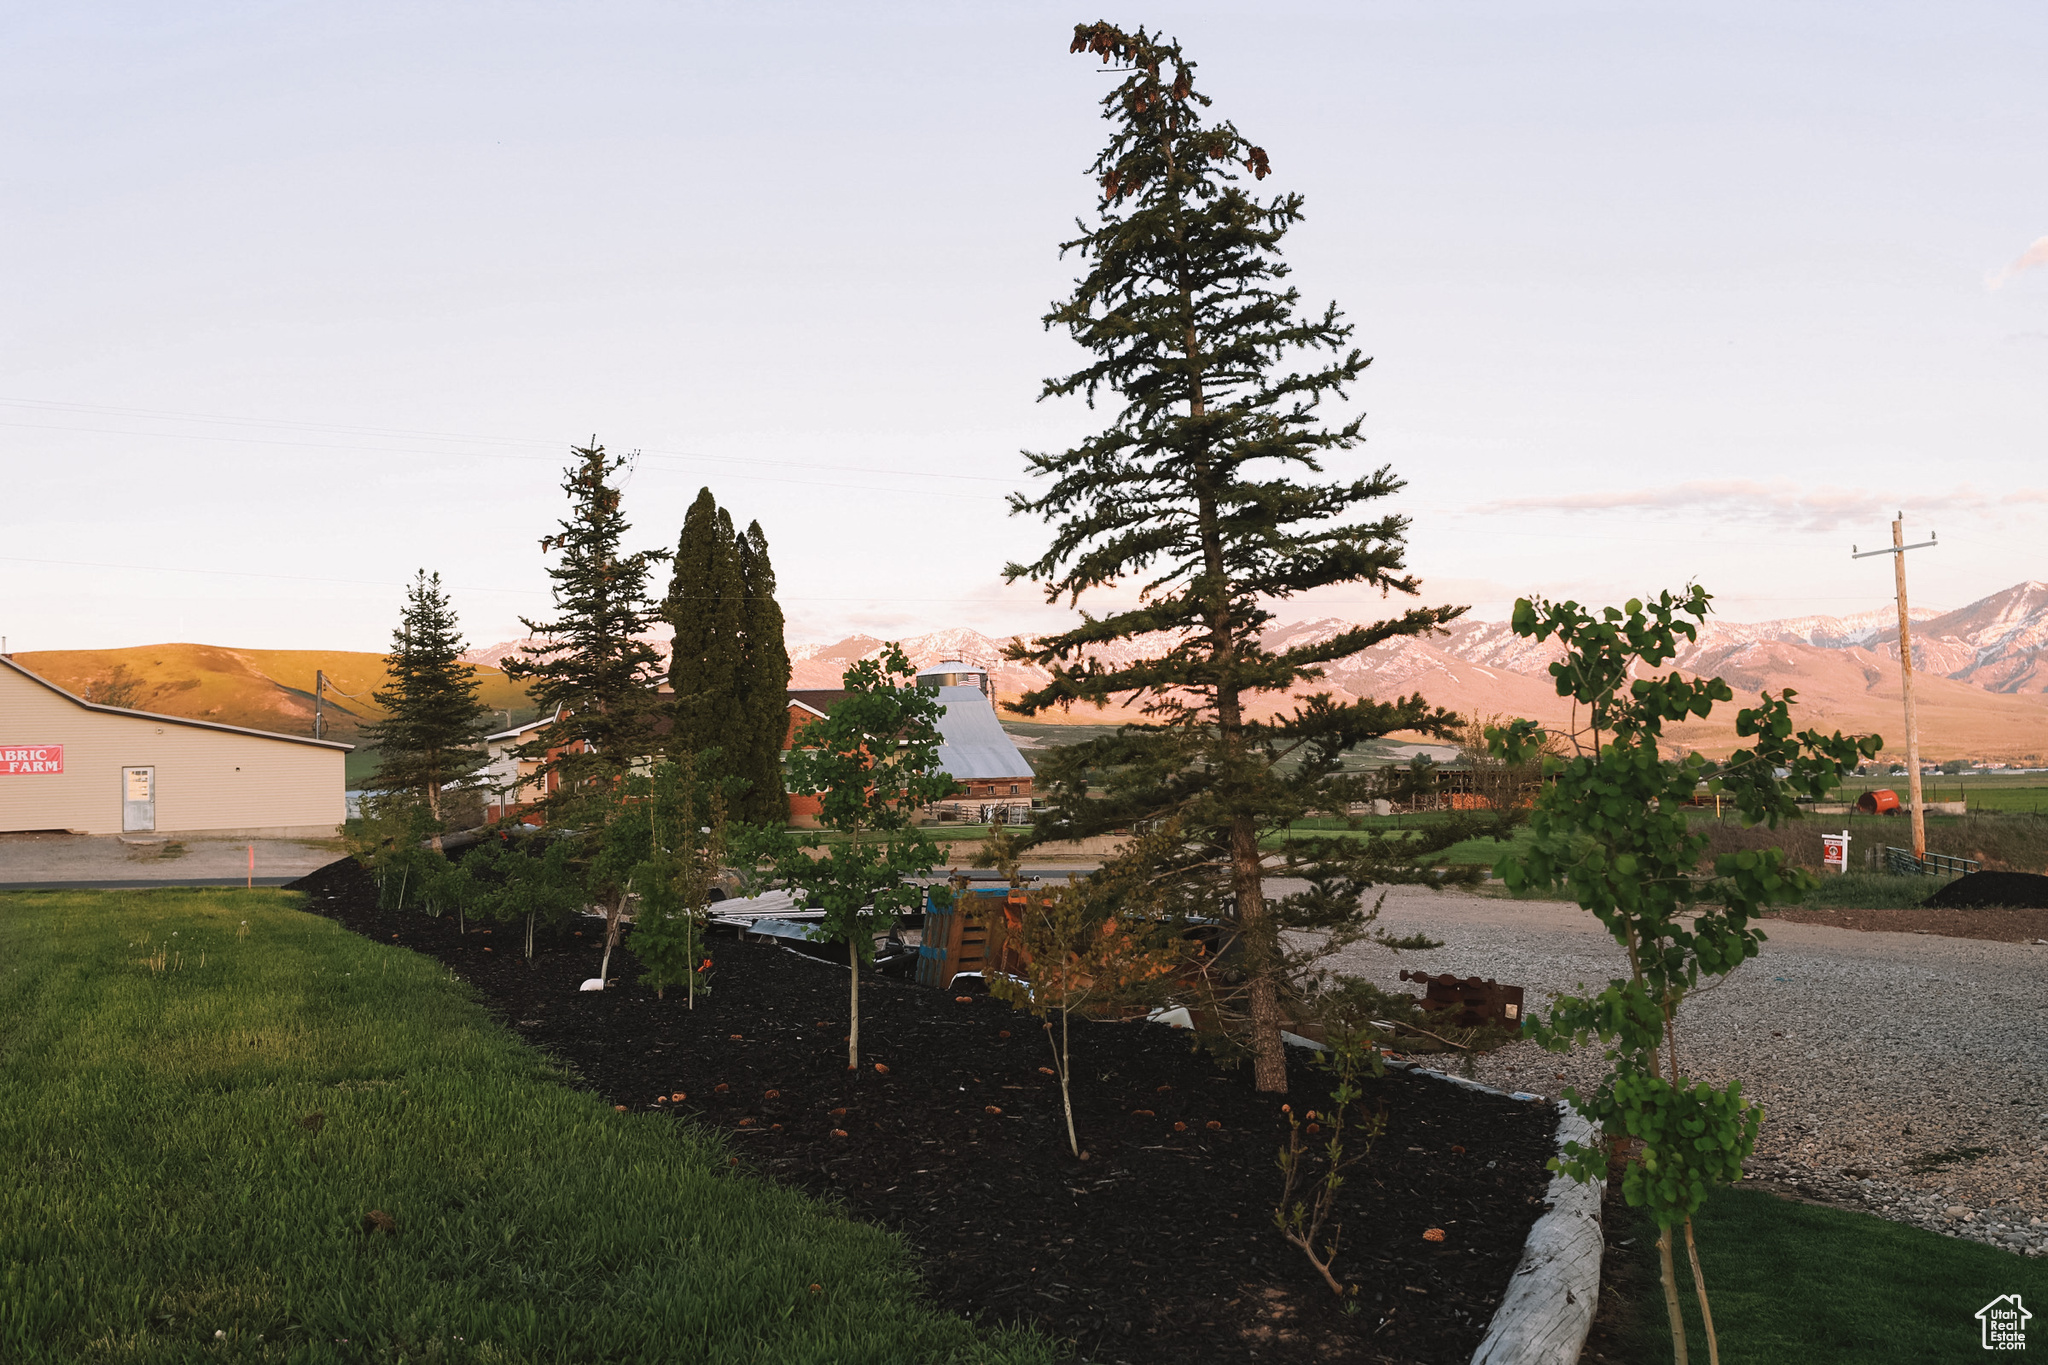 Yard at dusk featuring a mountain view and mature trees.